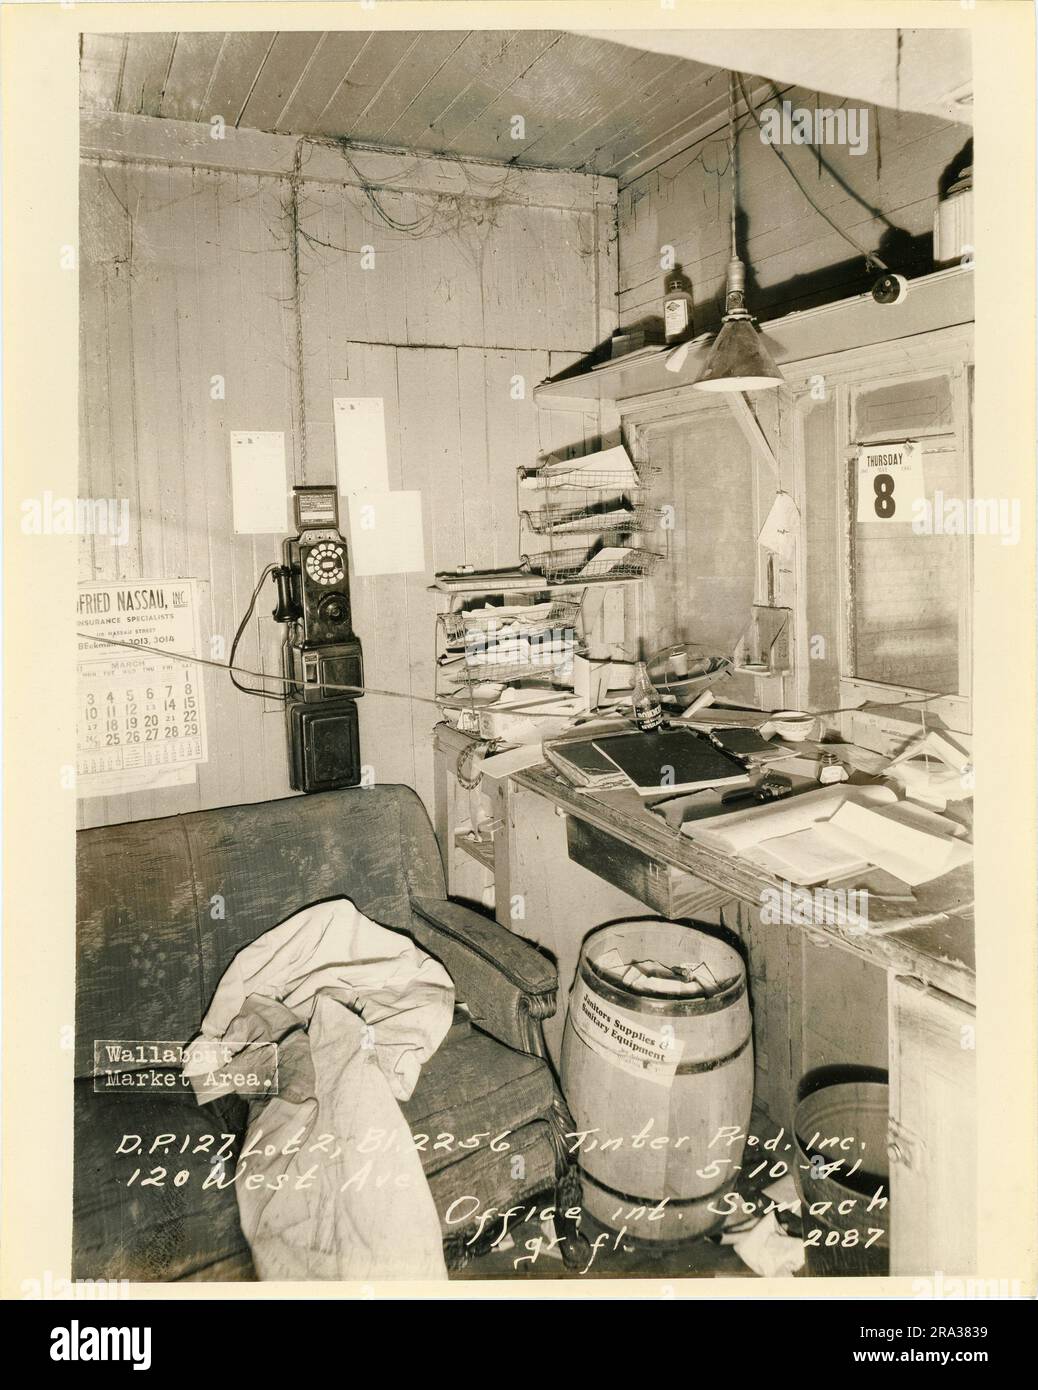 Photograph of interior of lot 2, Bl. 2256, 120 West Ave, office interior on ground floor of Tinter Produce, Inch, D.P. 127. Stock Photo